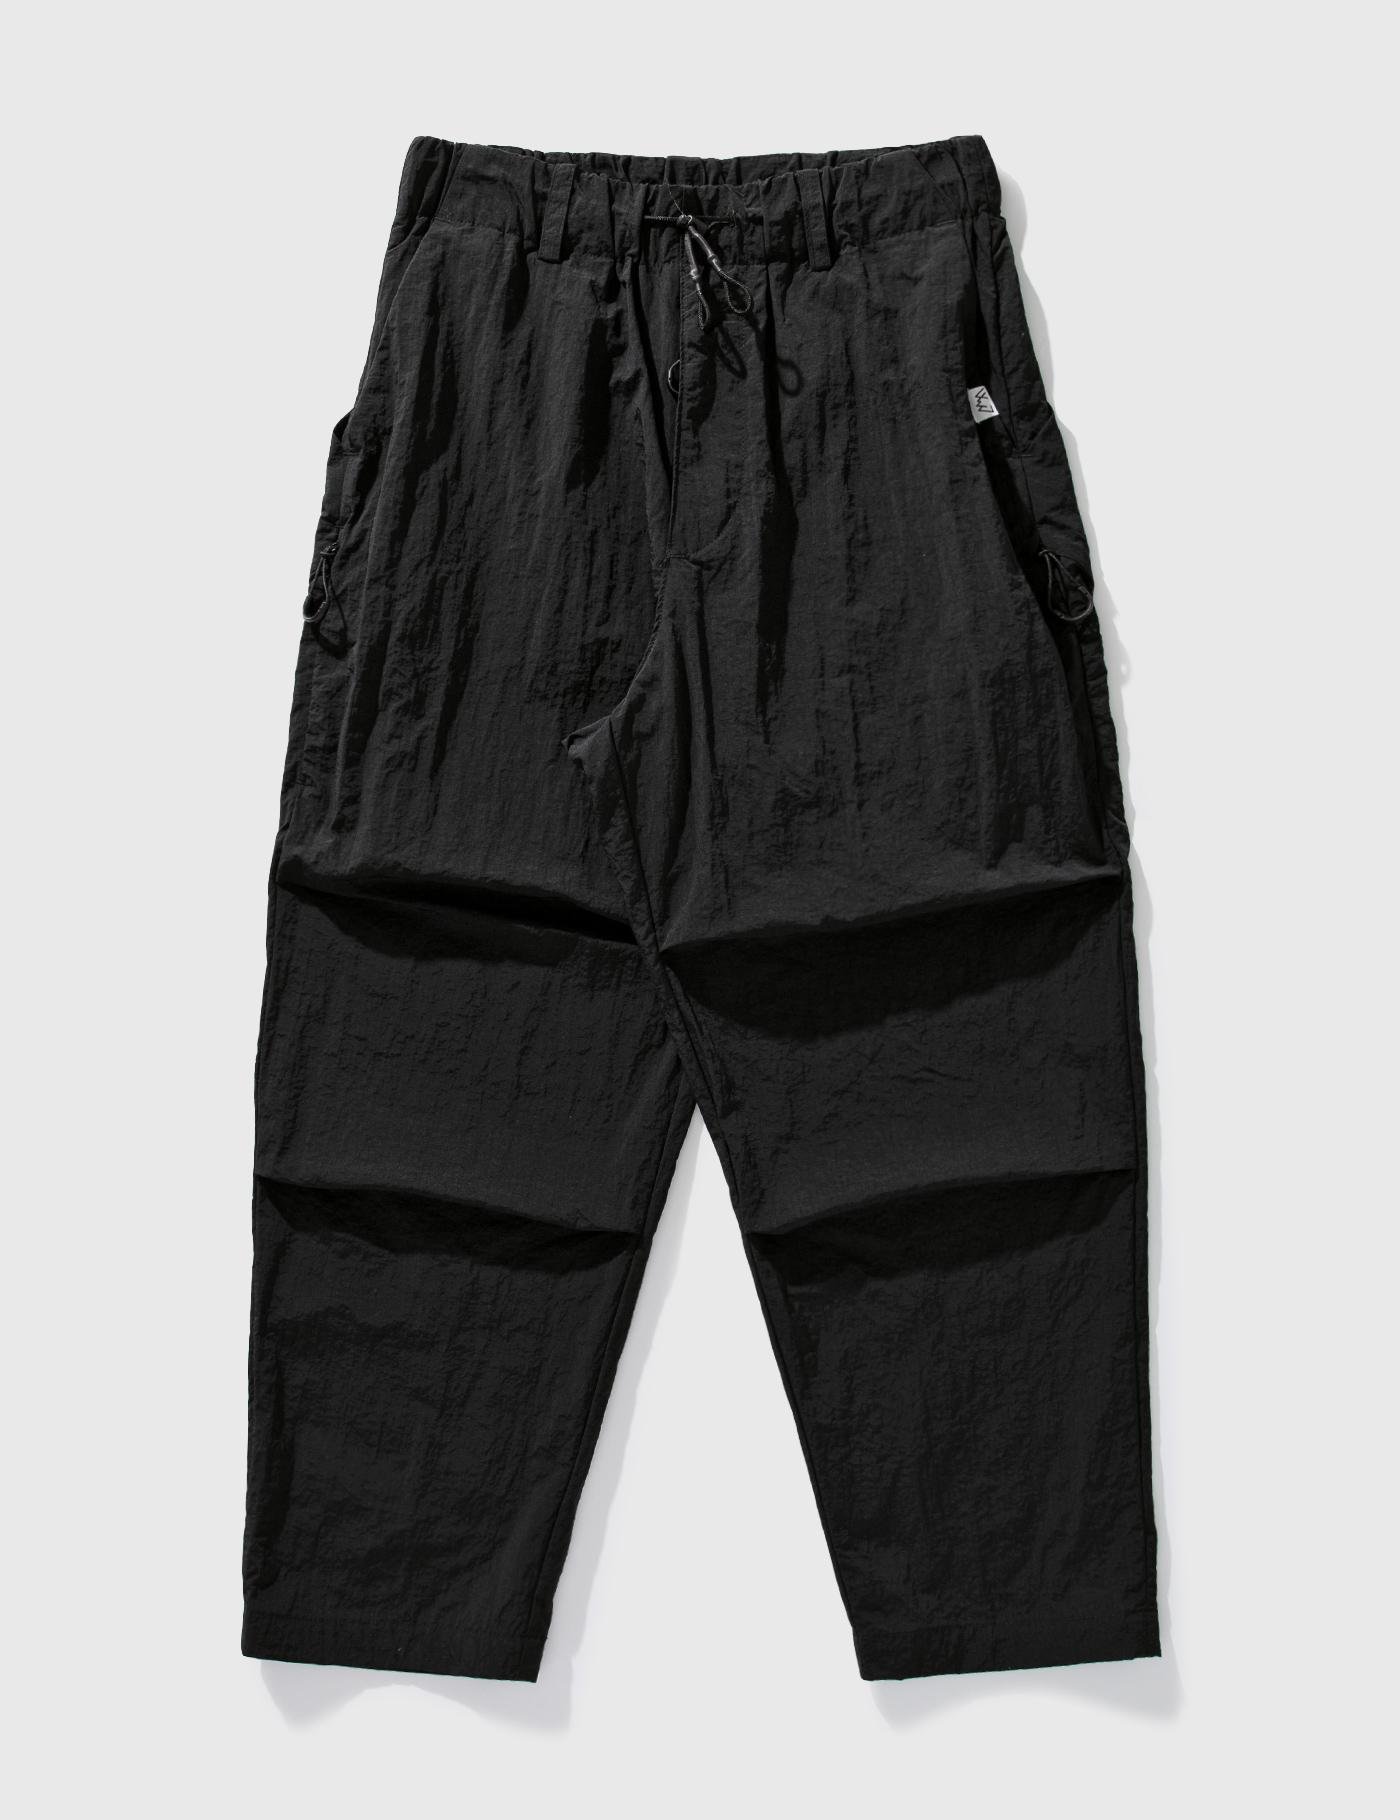 Nylon Cargo Pants by COMFY OUTDOOR GARMENT